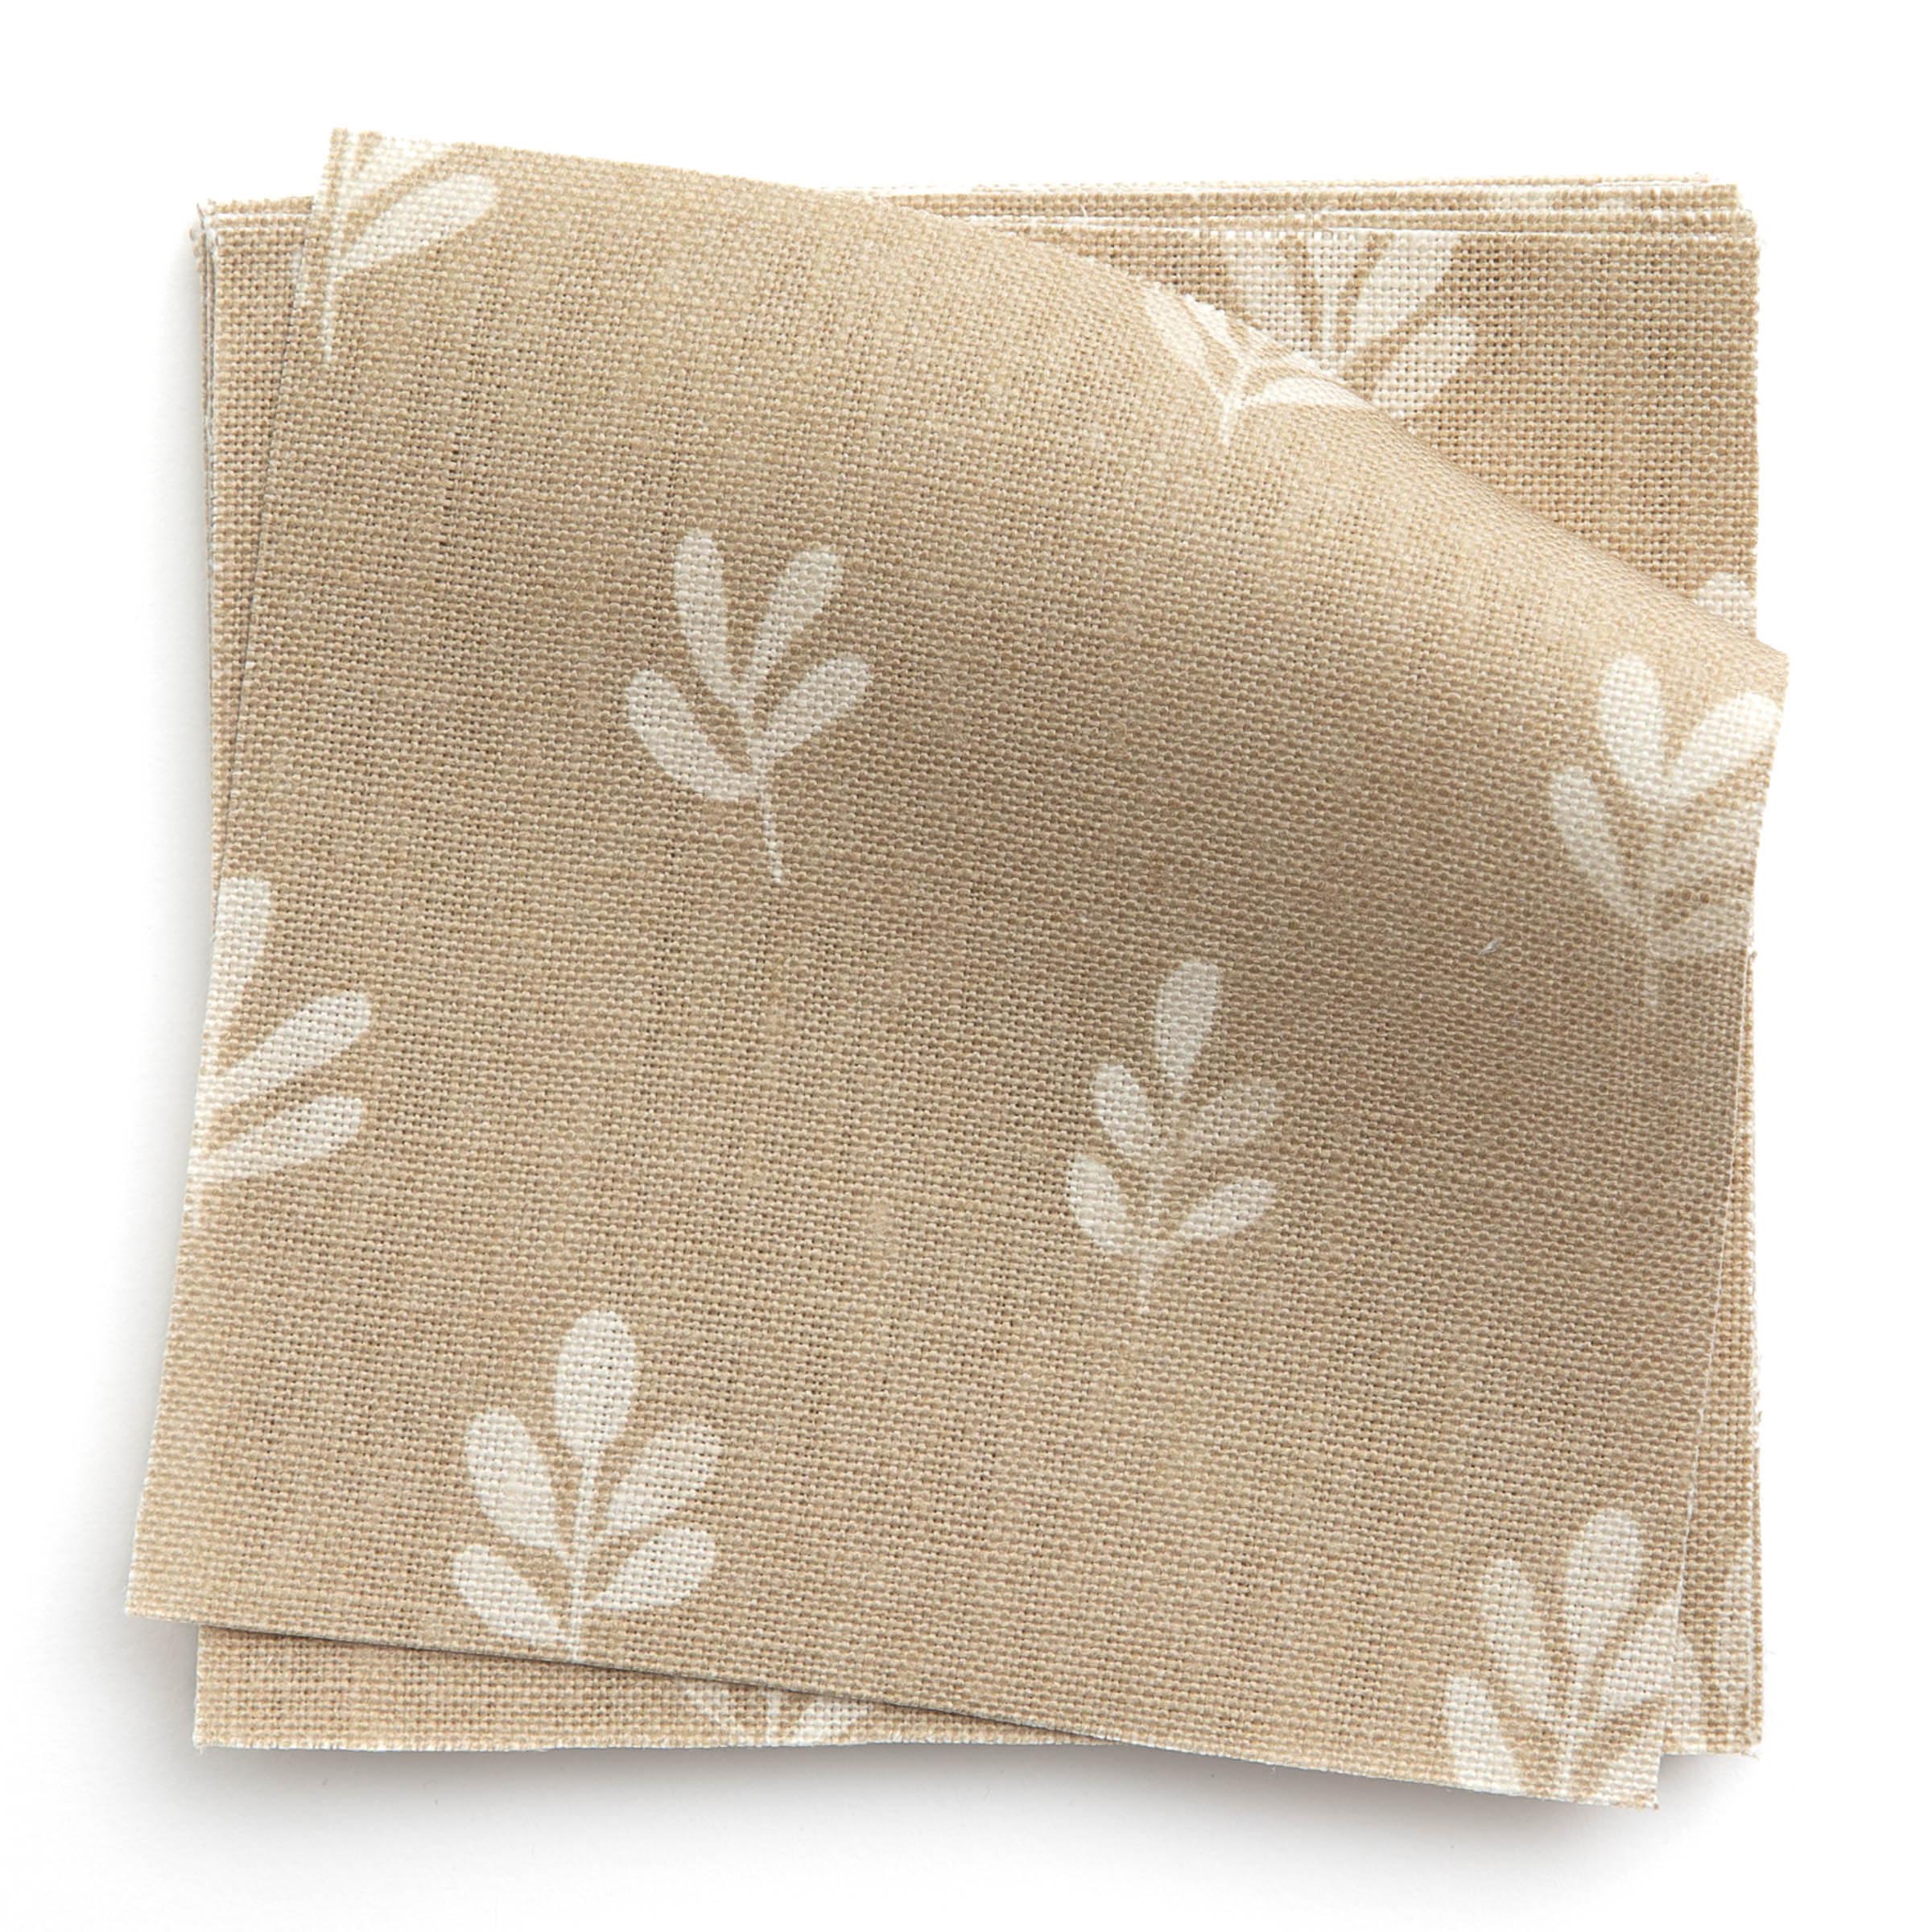 A stack of fabric swatches in a repeating leaf print in cream on a tan field.